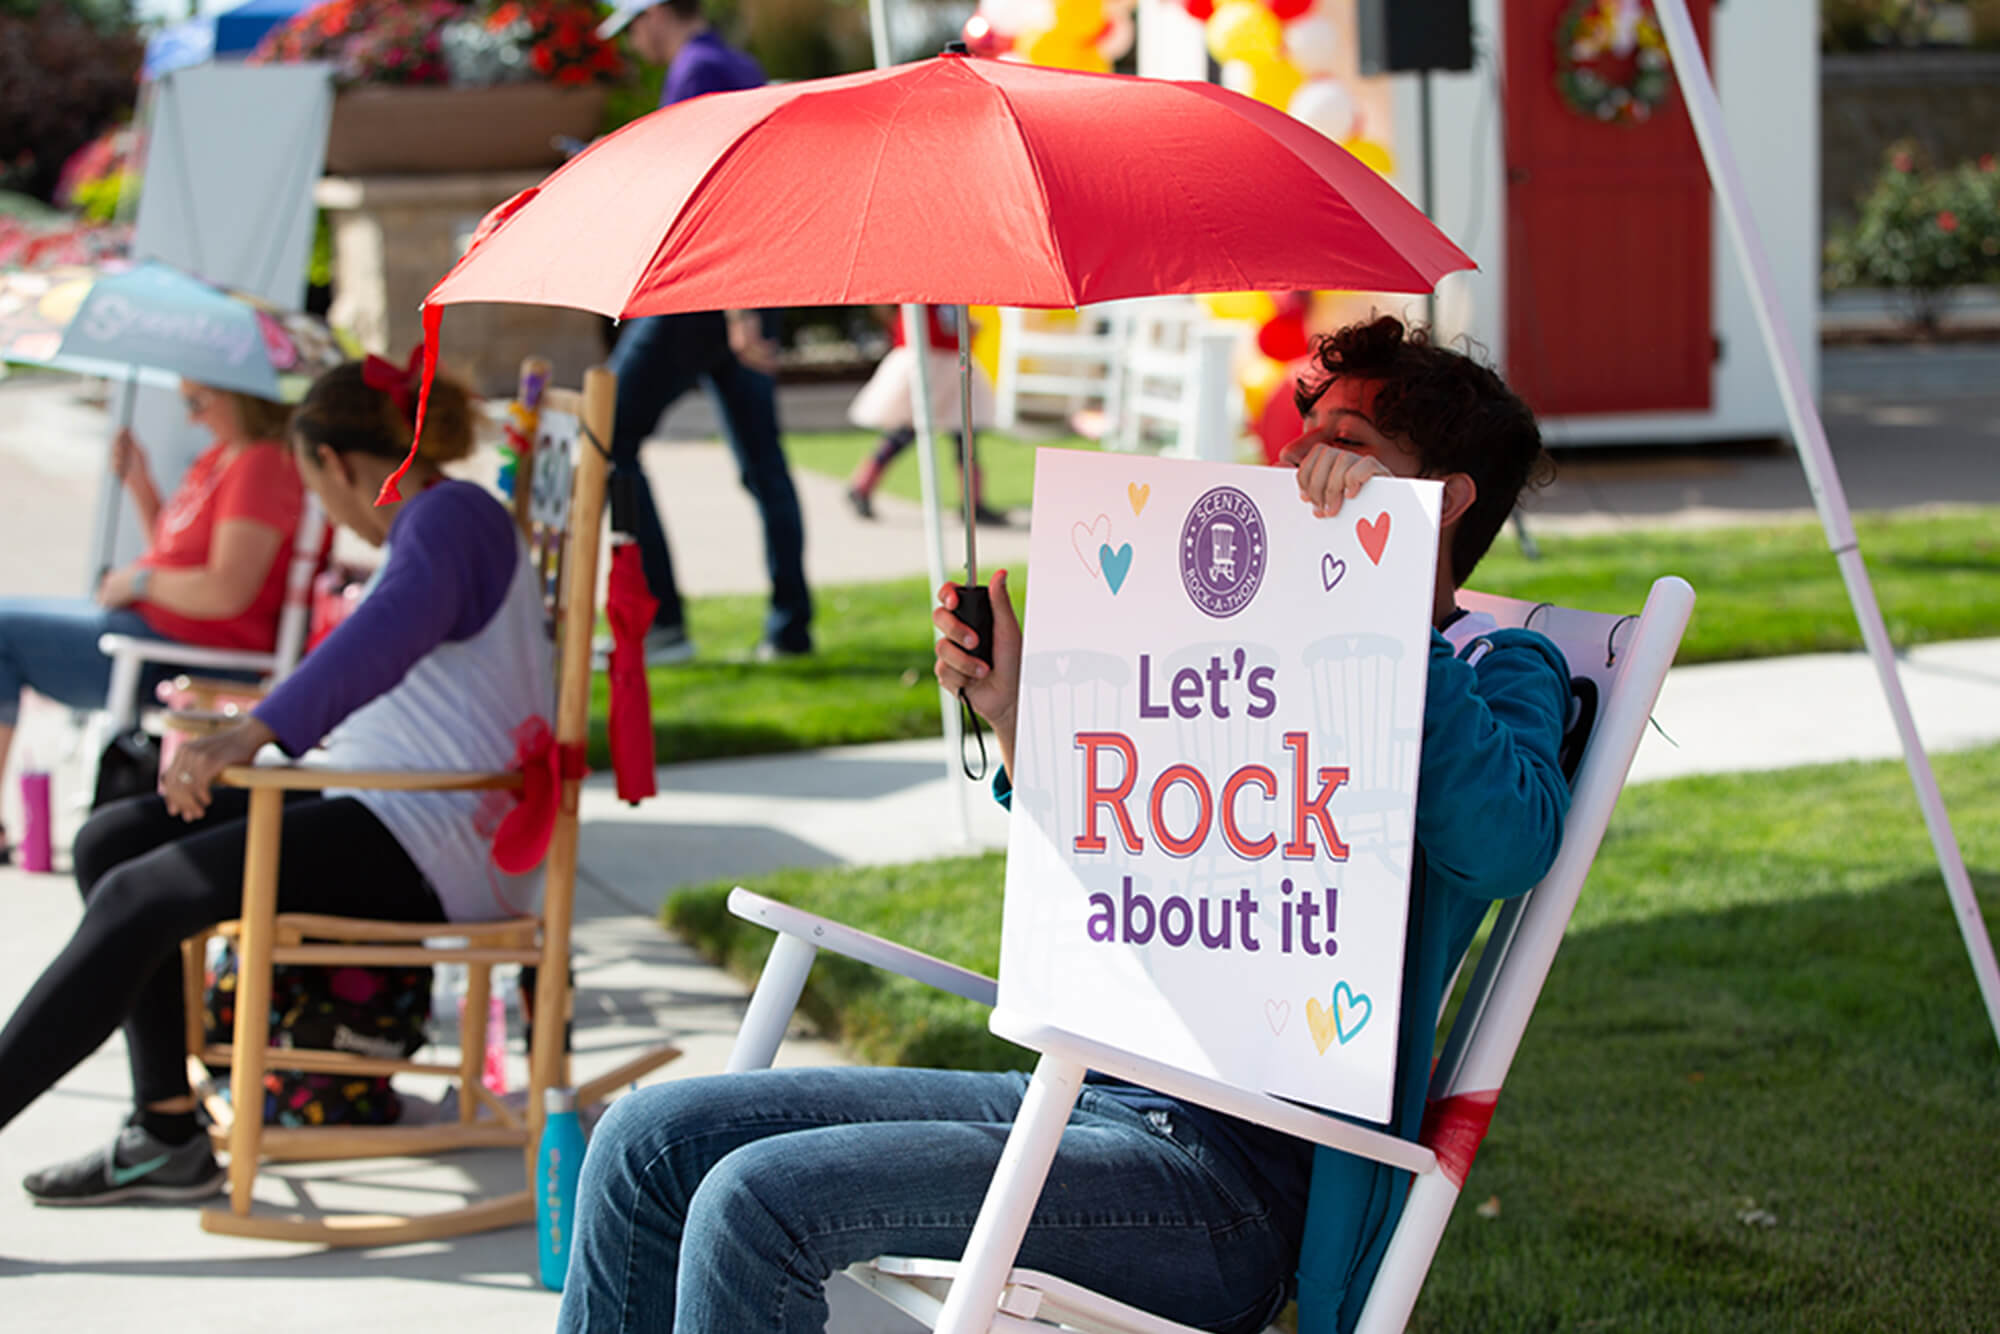 Rock for kids’ sake with the Scentsy Rock-a-Thon